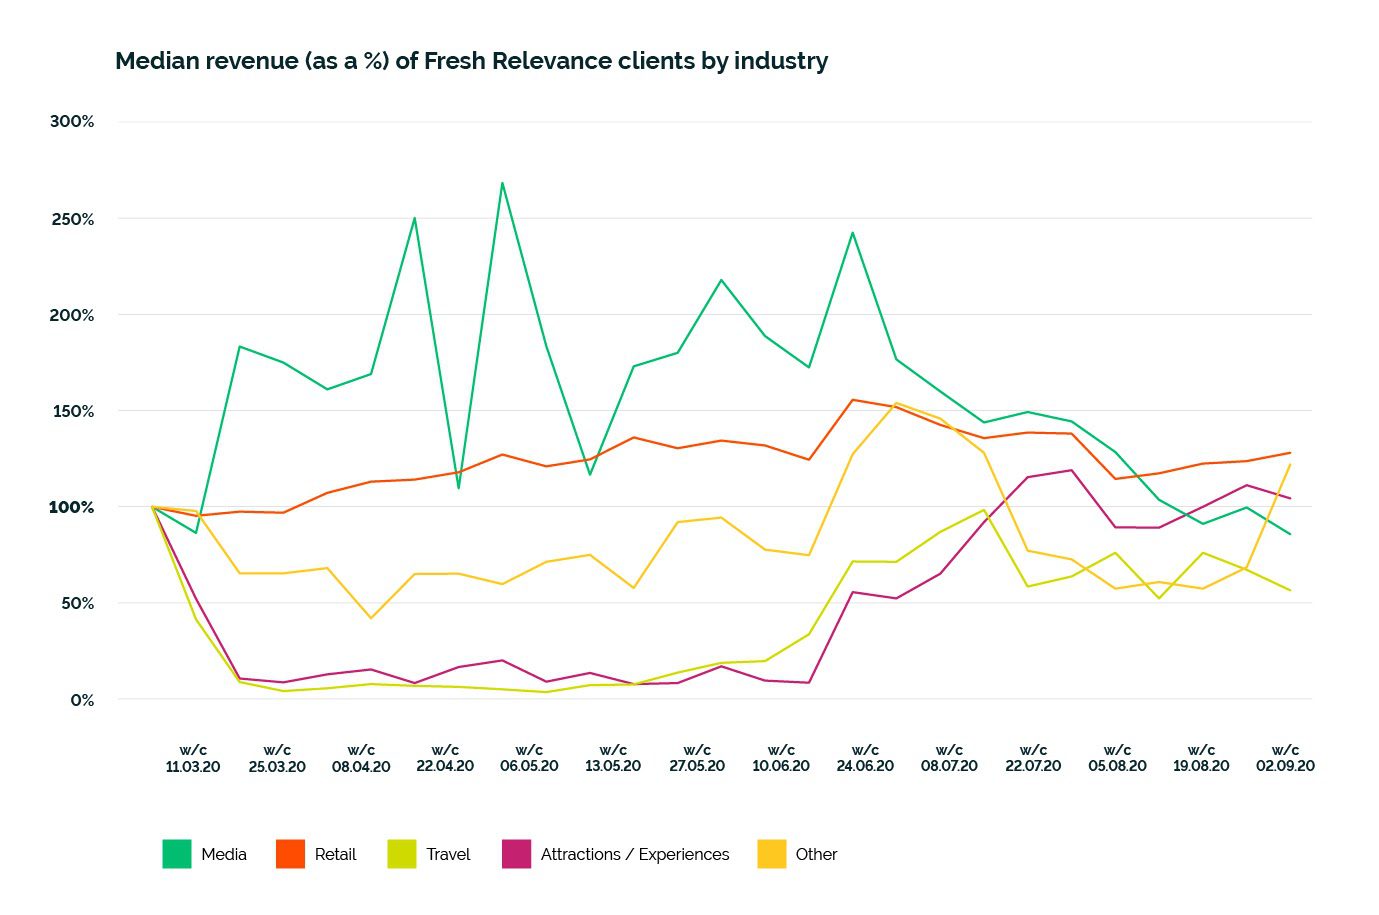 Median revenue of Fresh Relevance clients by industry